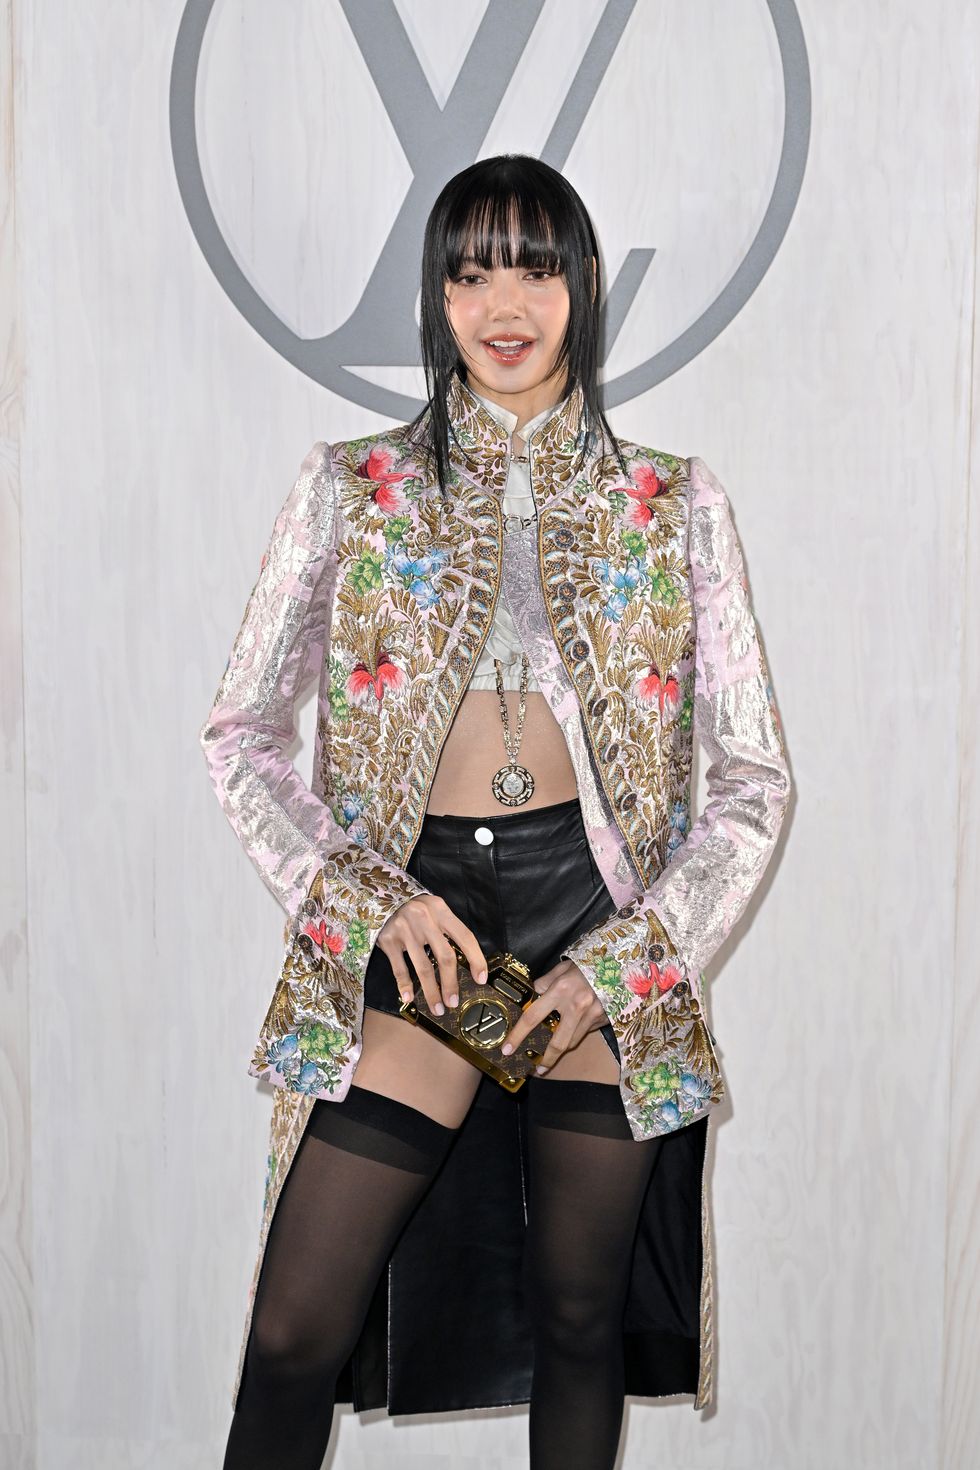 lisa at the louis vuitton fashion show in march